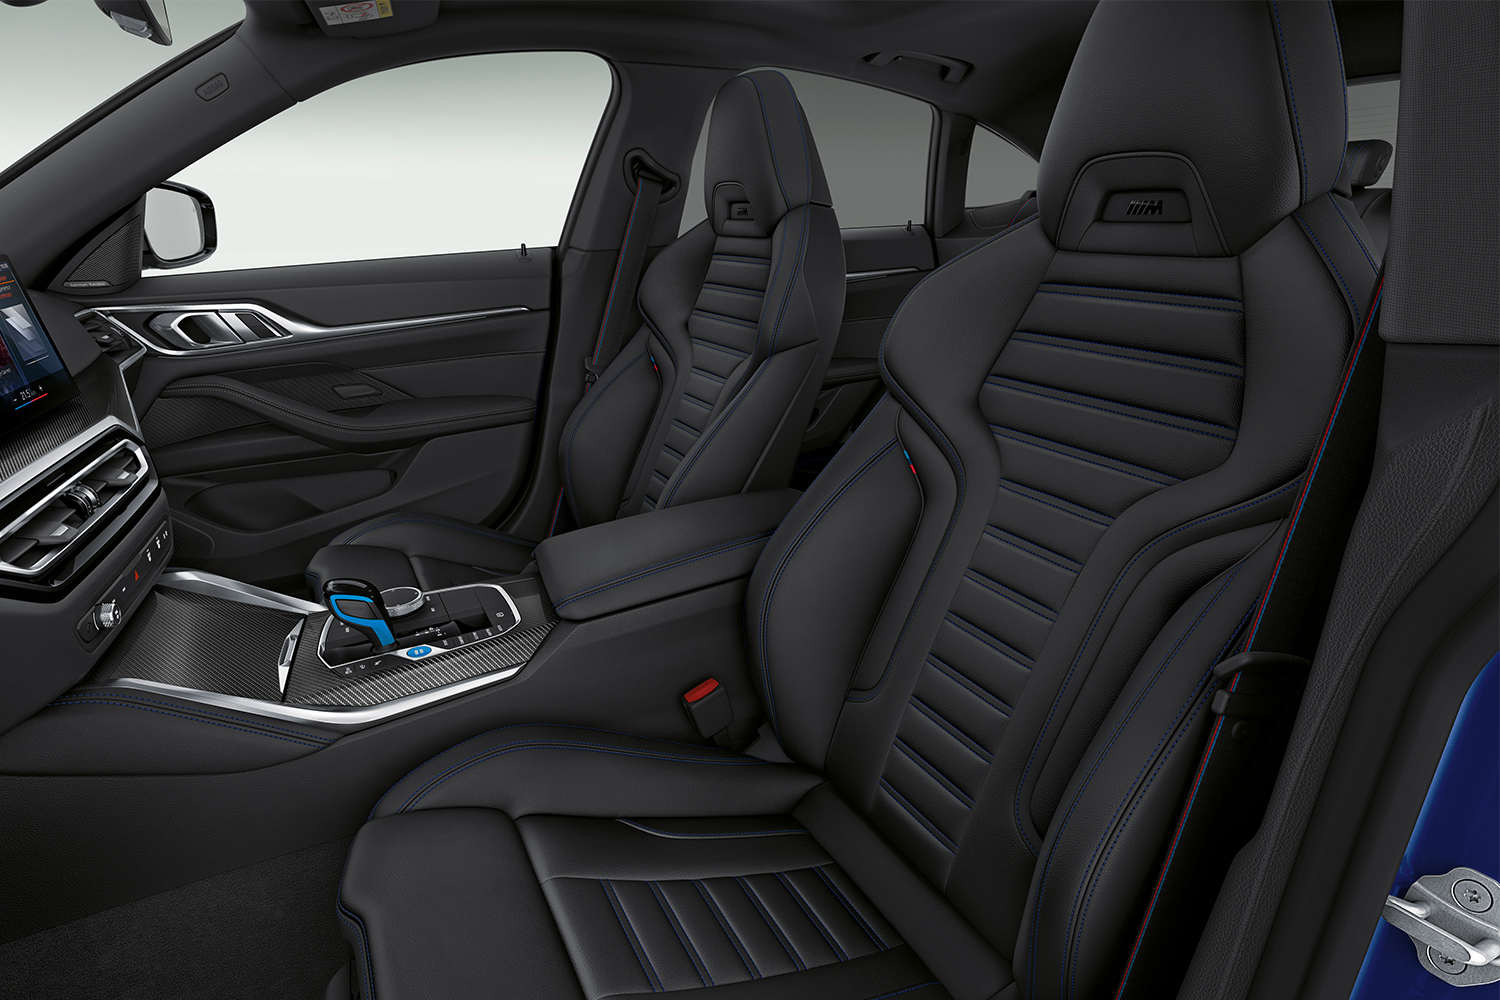 The front two seats of the 2022 BMW i4 M50 electric sedan